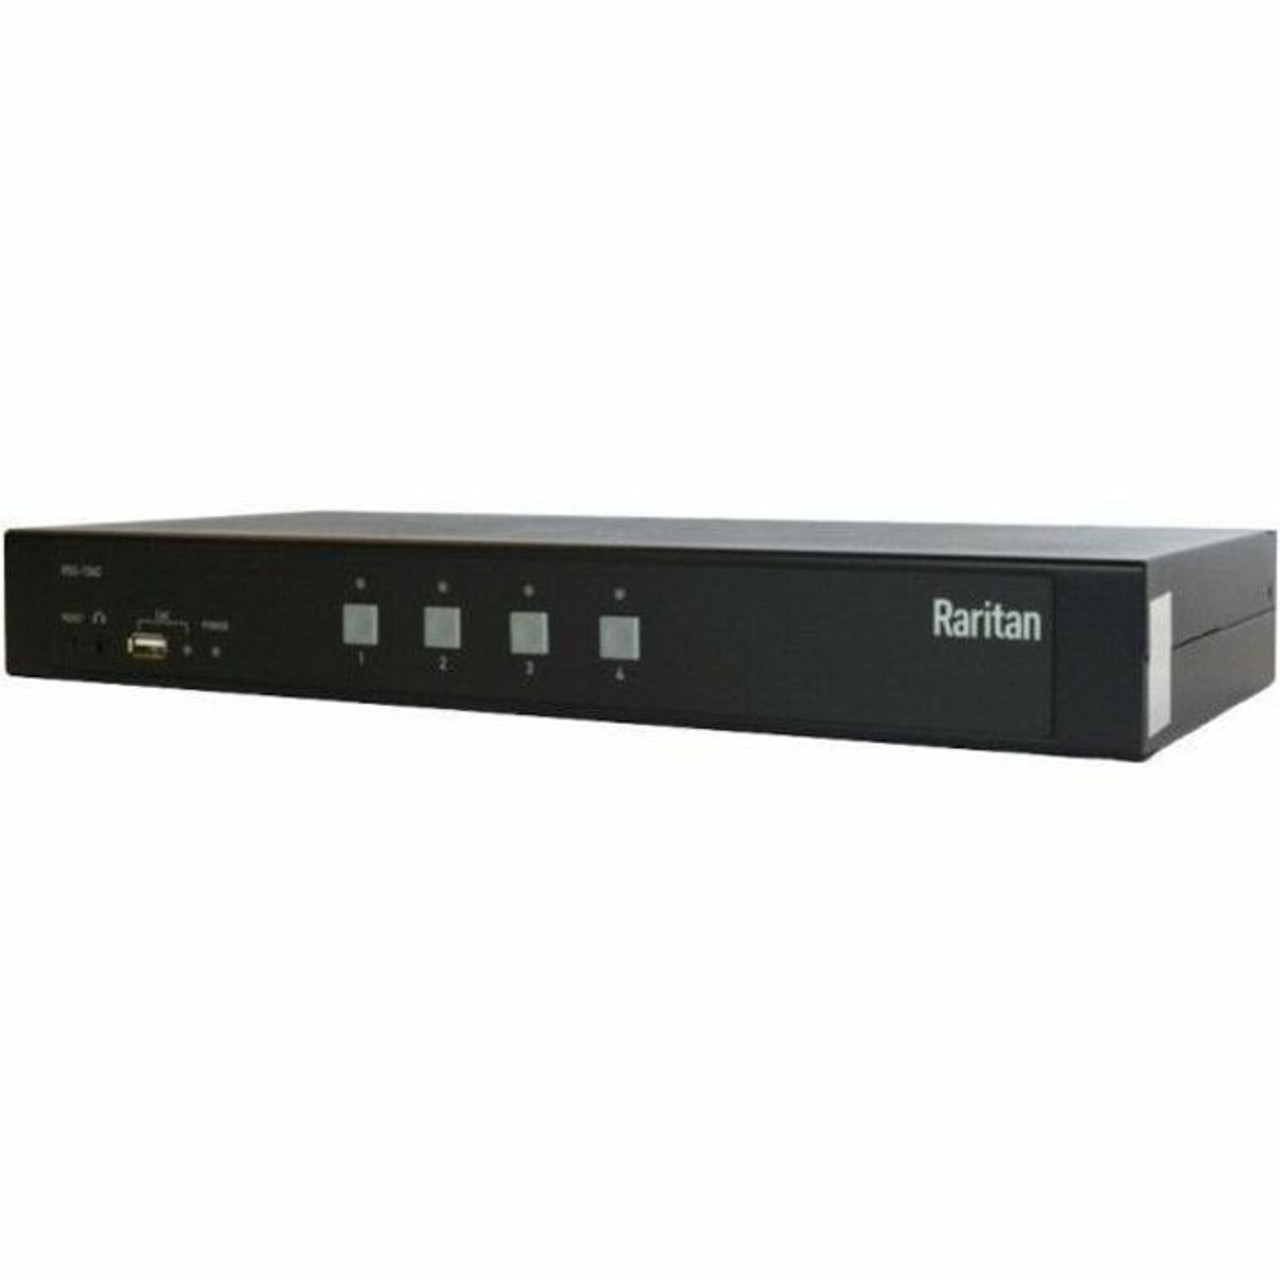 Raritan 2-port Single Head SecureSwitch, NIAP PP4.0 certificated, DP, support CAC - RSS4-102-DP